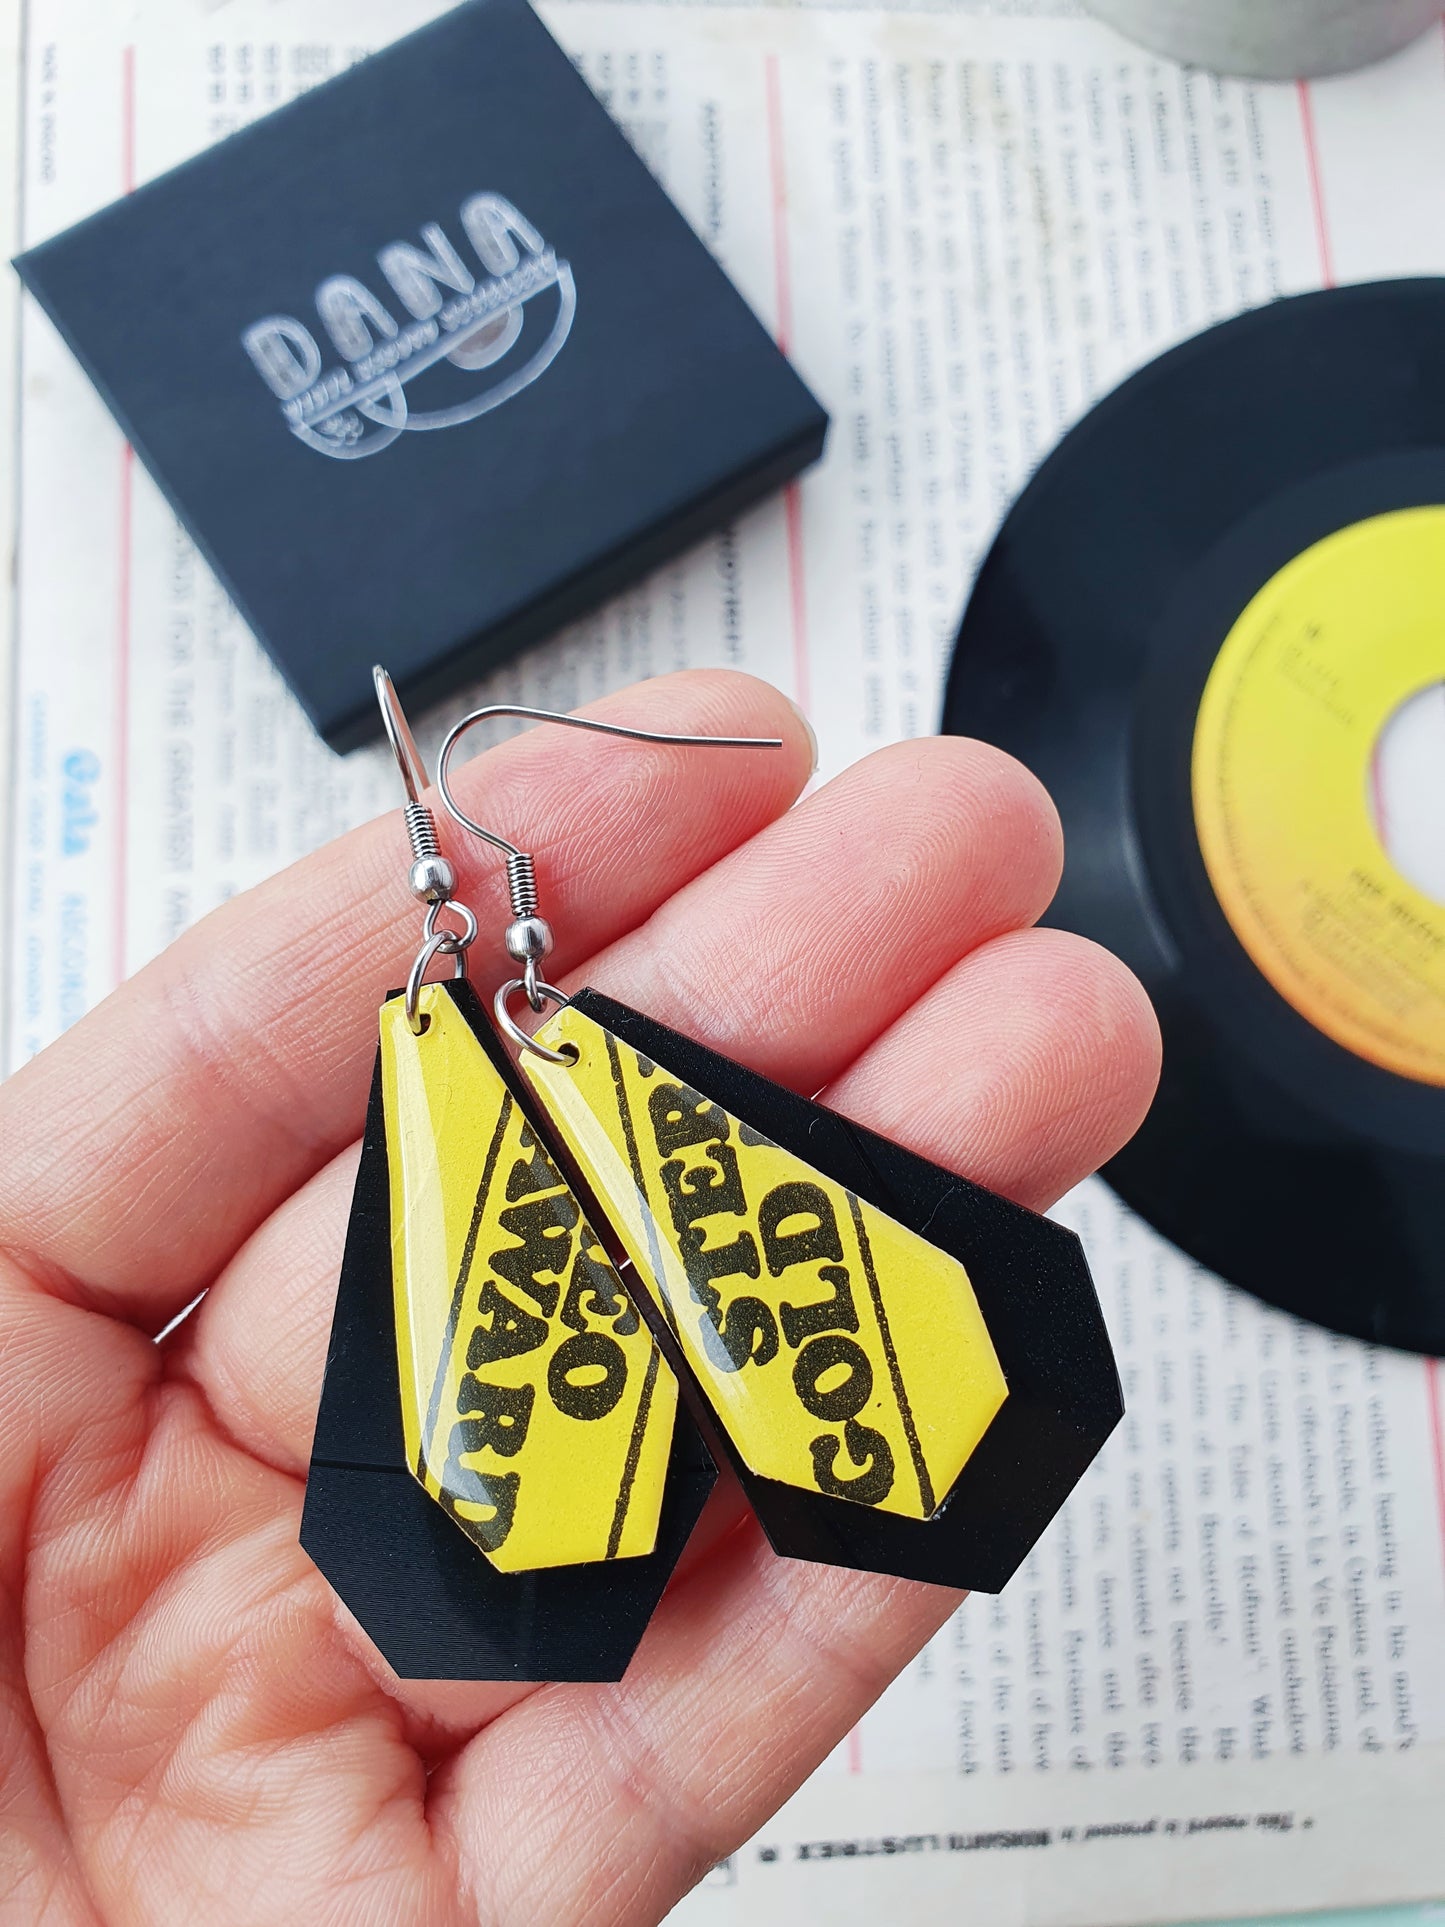 20% OFF Stereo Gold Award /Unique handmade vinyl upcycled earrings